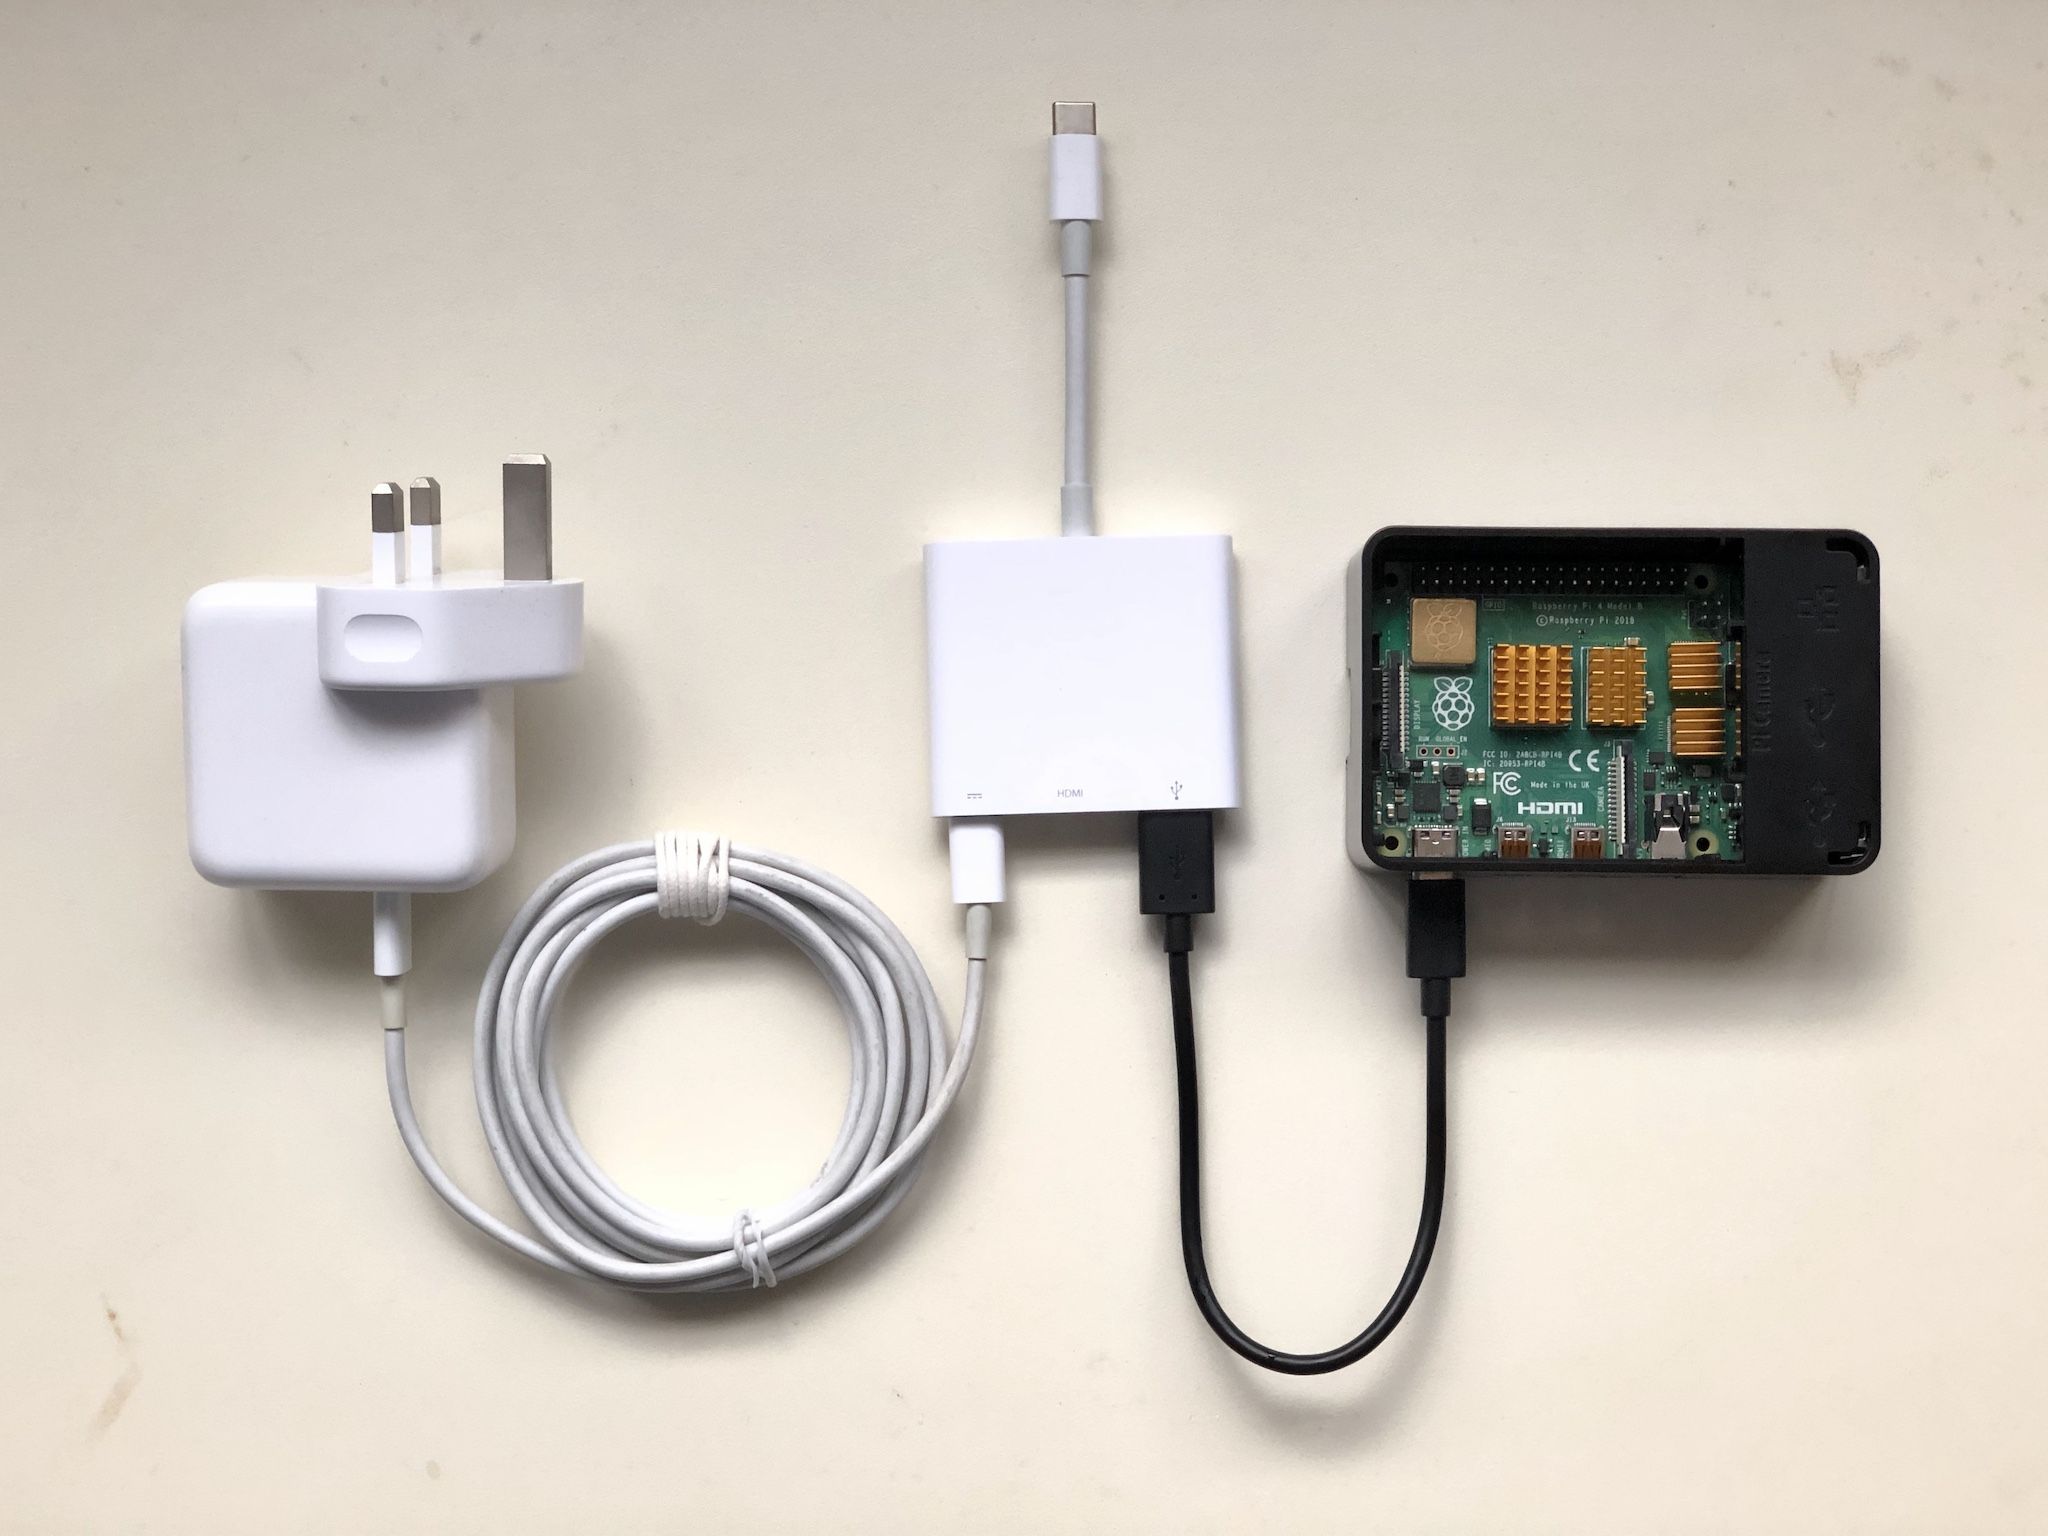 Using the Apple USB-C connector to charge the iPad Pro and access the Pi4 at the same time